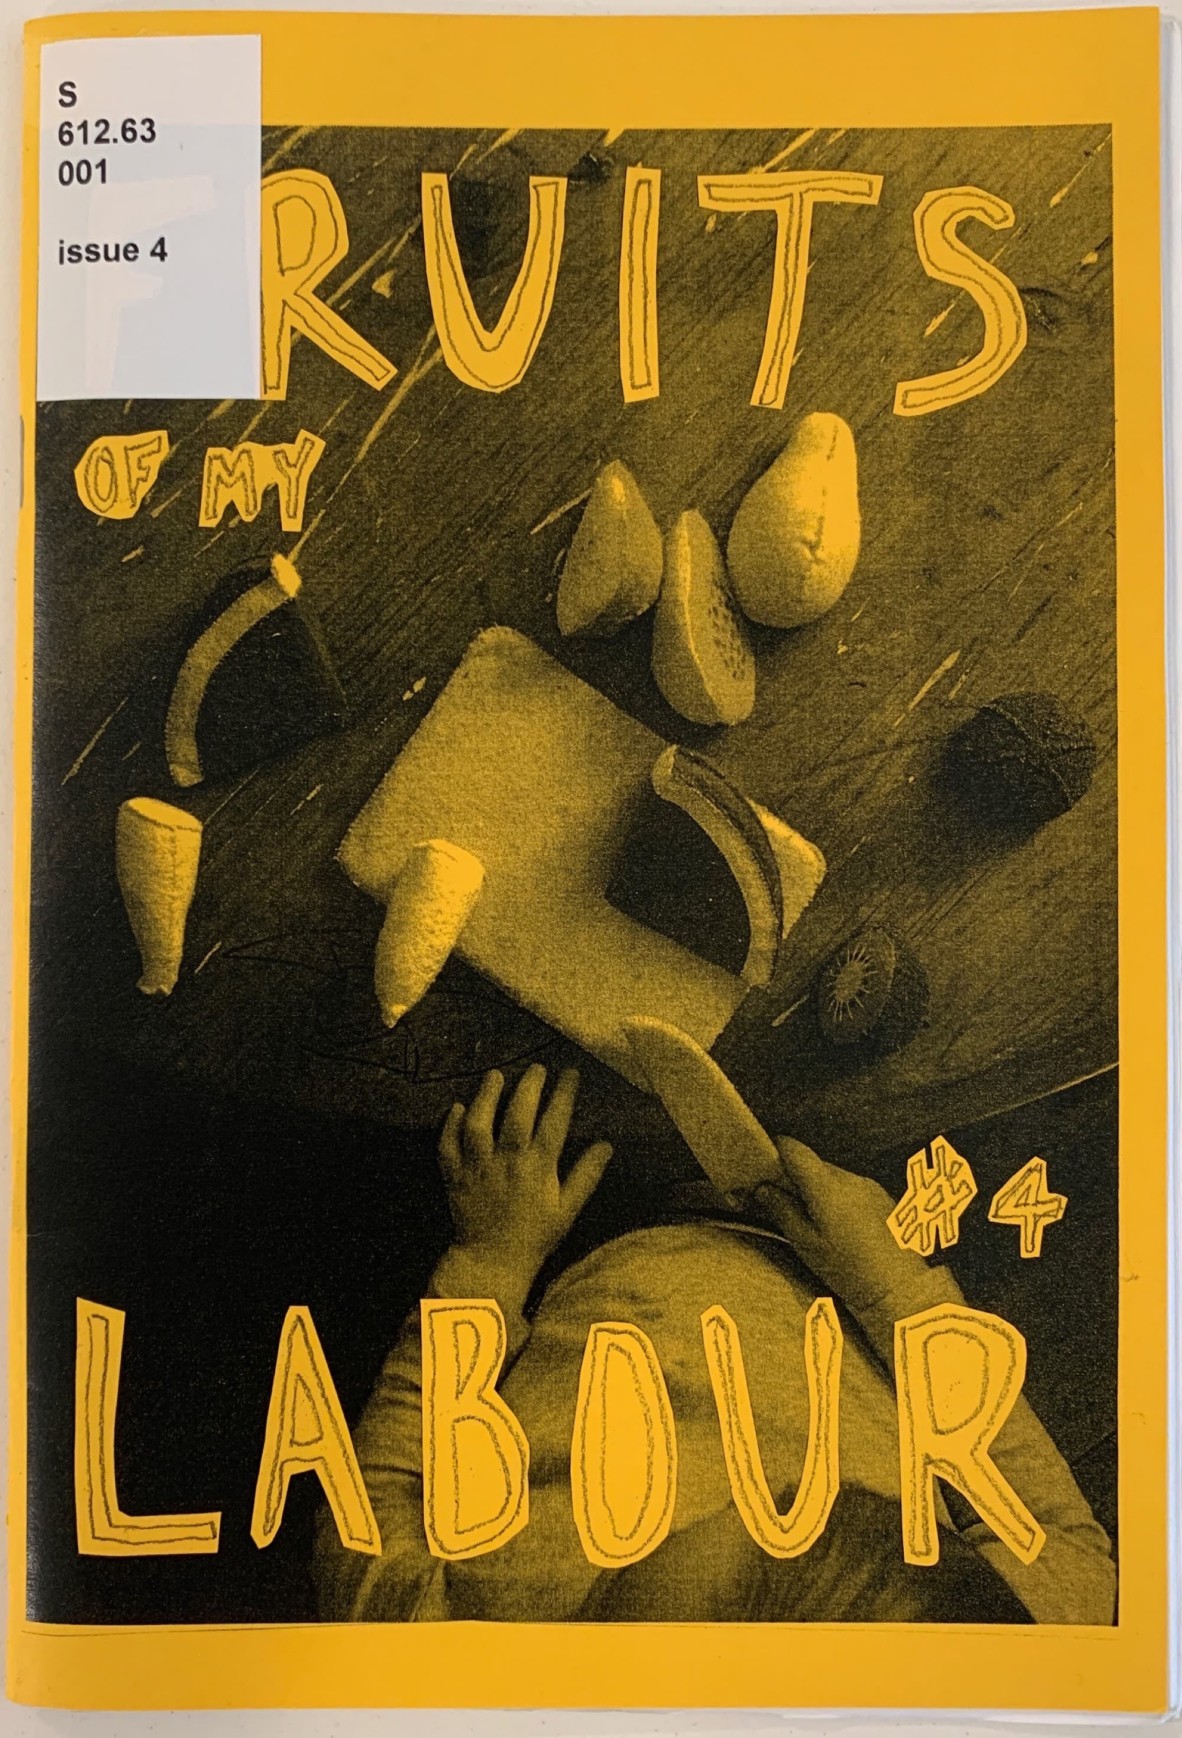 Front cover of Fruits of My Labour zine